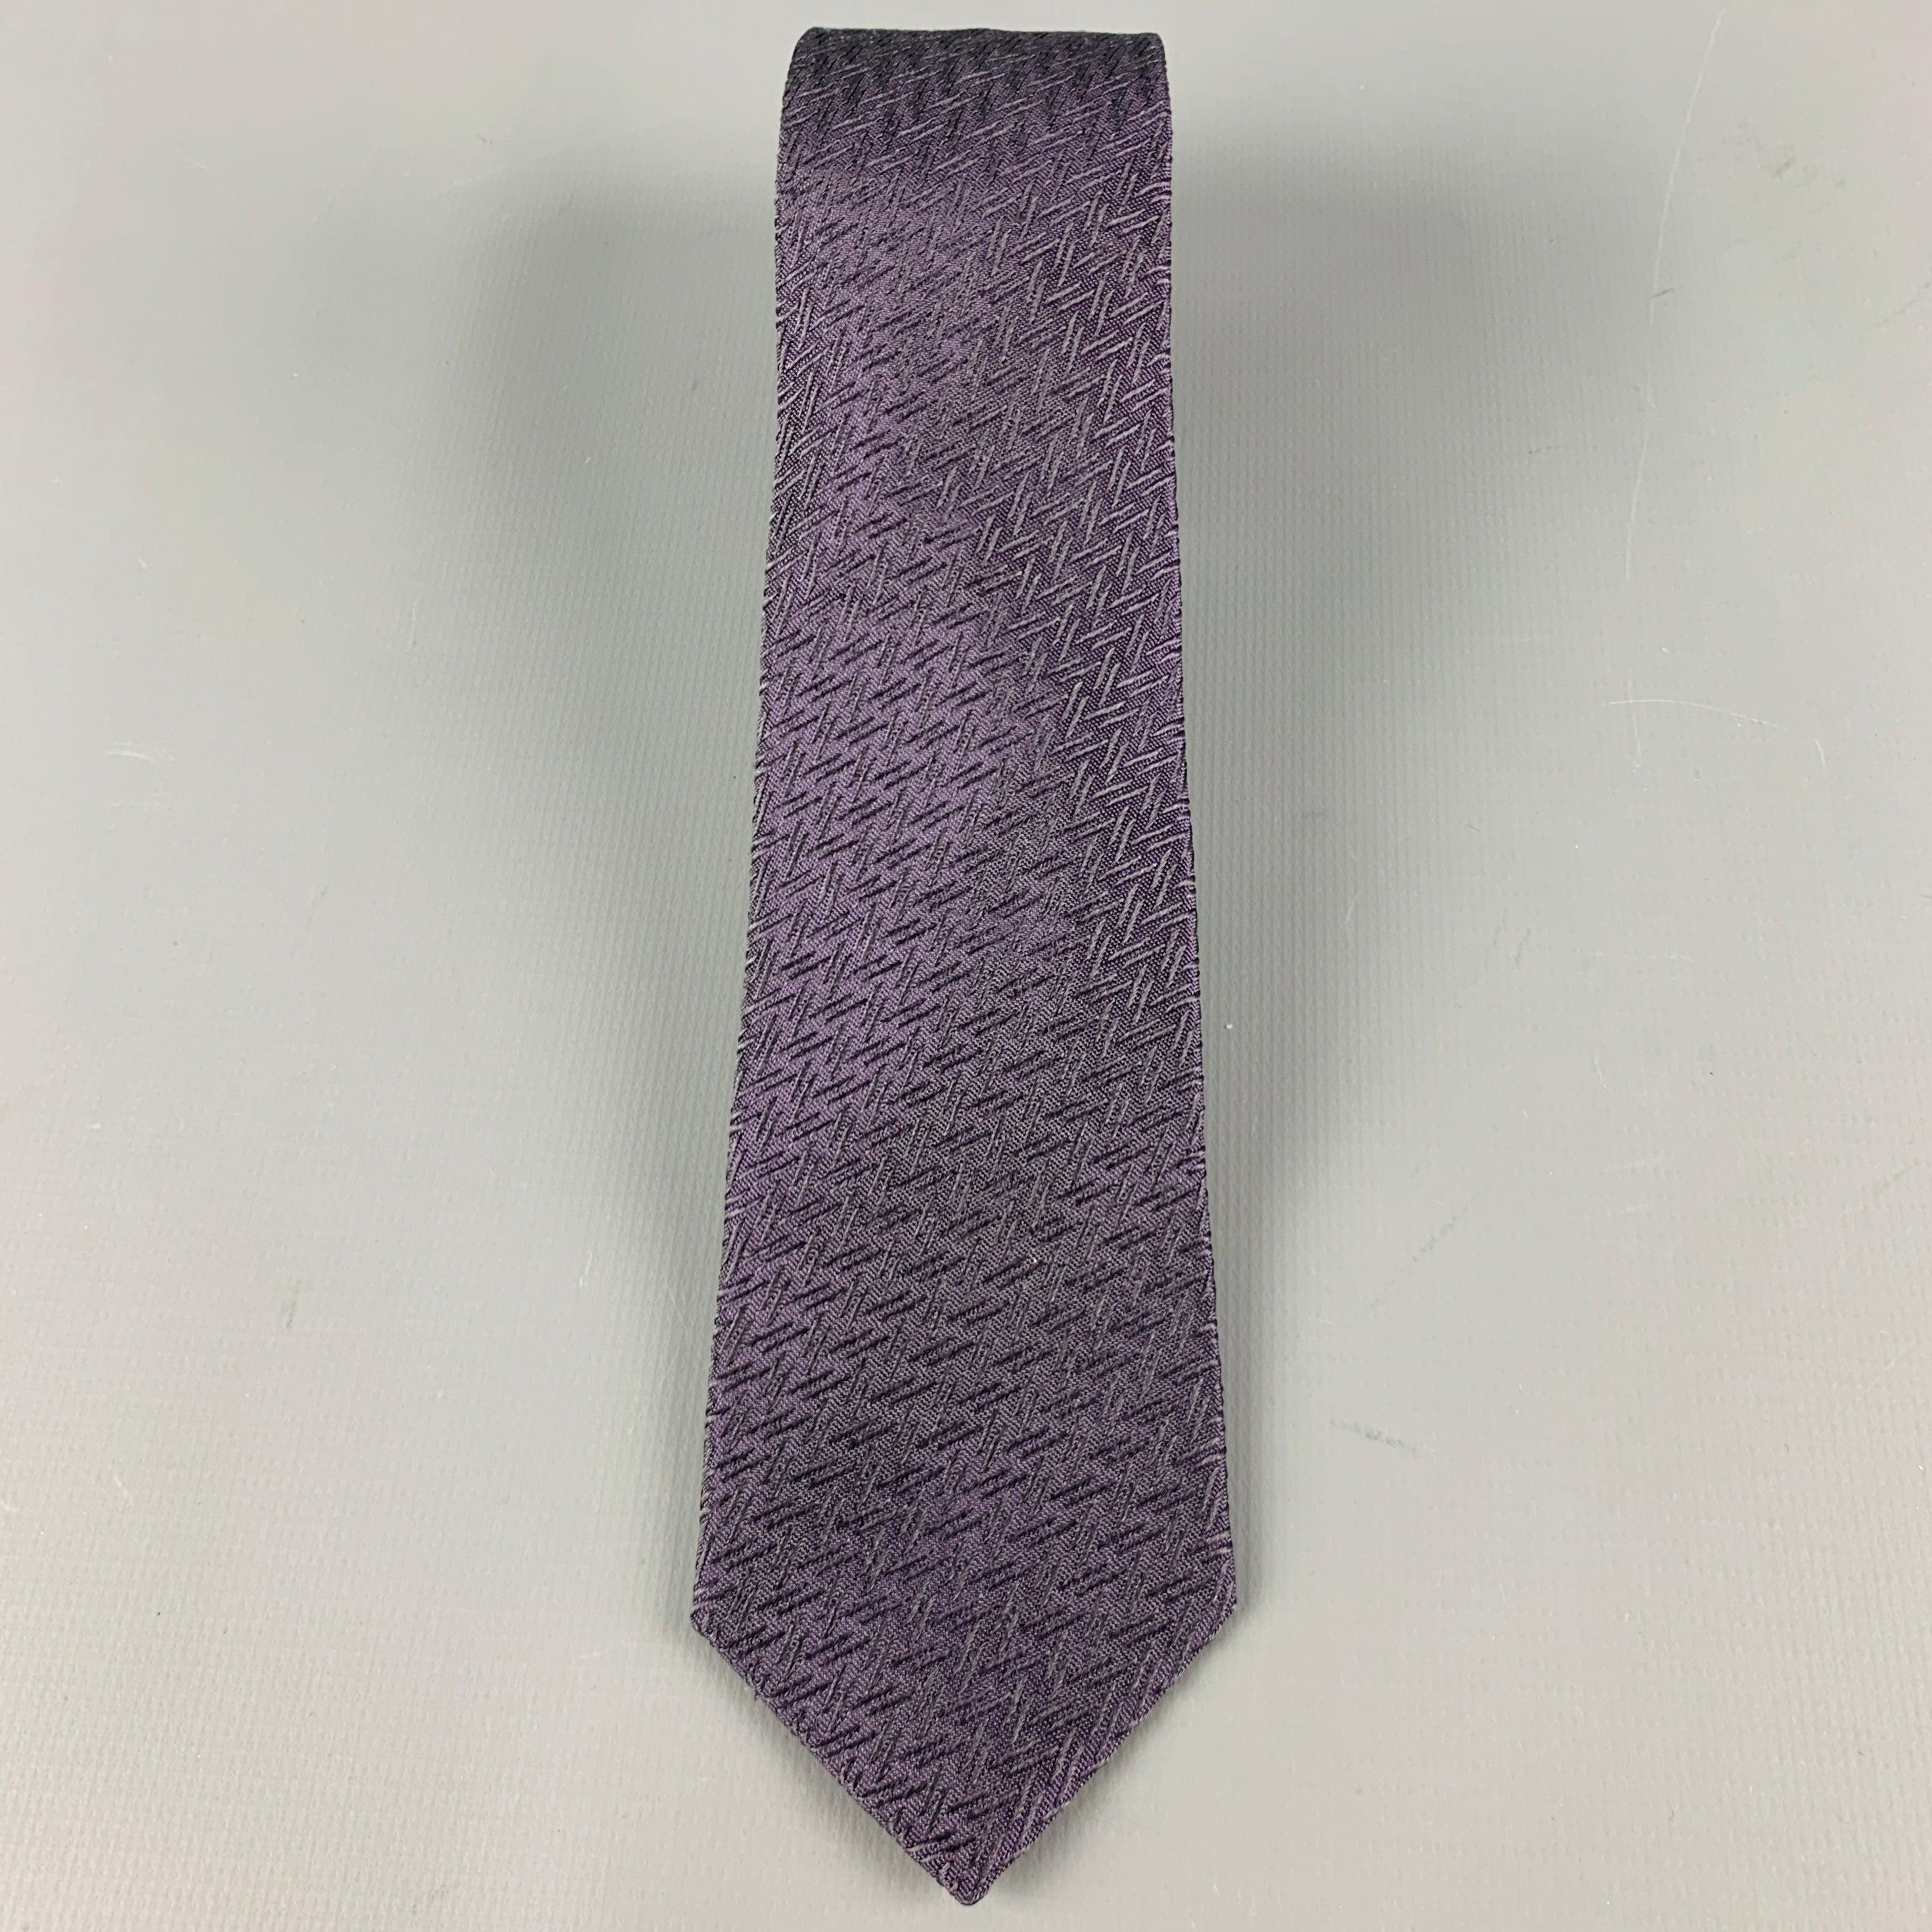 BURBERRY
necktie in a purple silk fabric featuring a textured jacquard and narrow style. Made in Italy.Excellent Pre-Owned Condition. 

Measurements: 
  Width: 2.25 inches Length: 59 inches 
  
  
 
Reference No.: 128740
Category: Tie
More Details
 